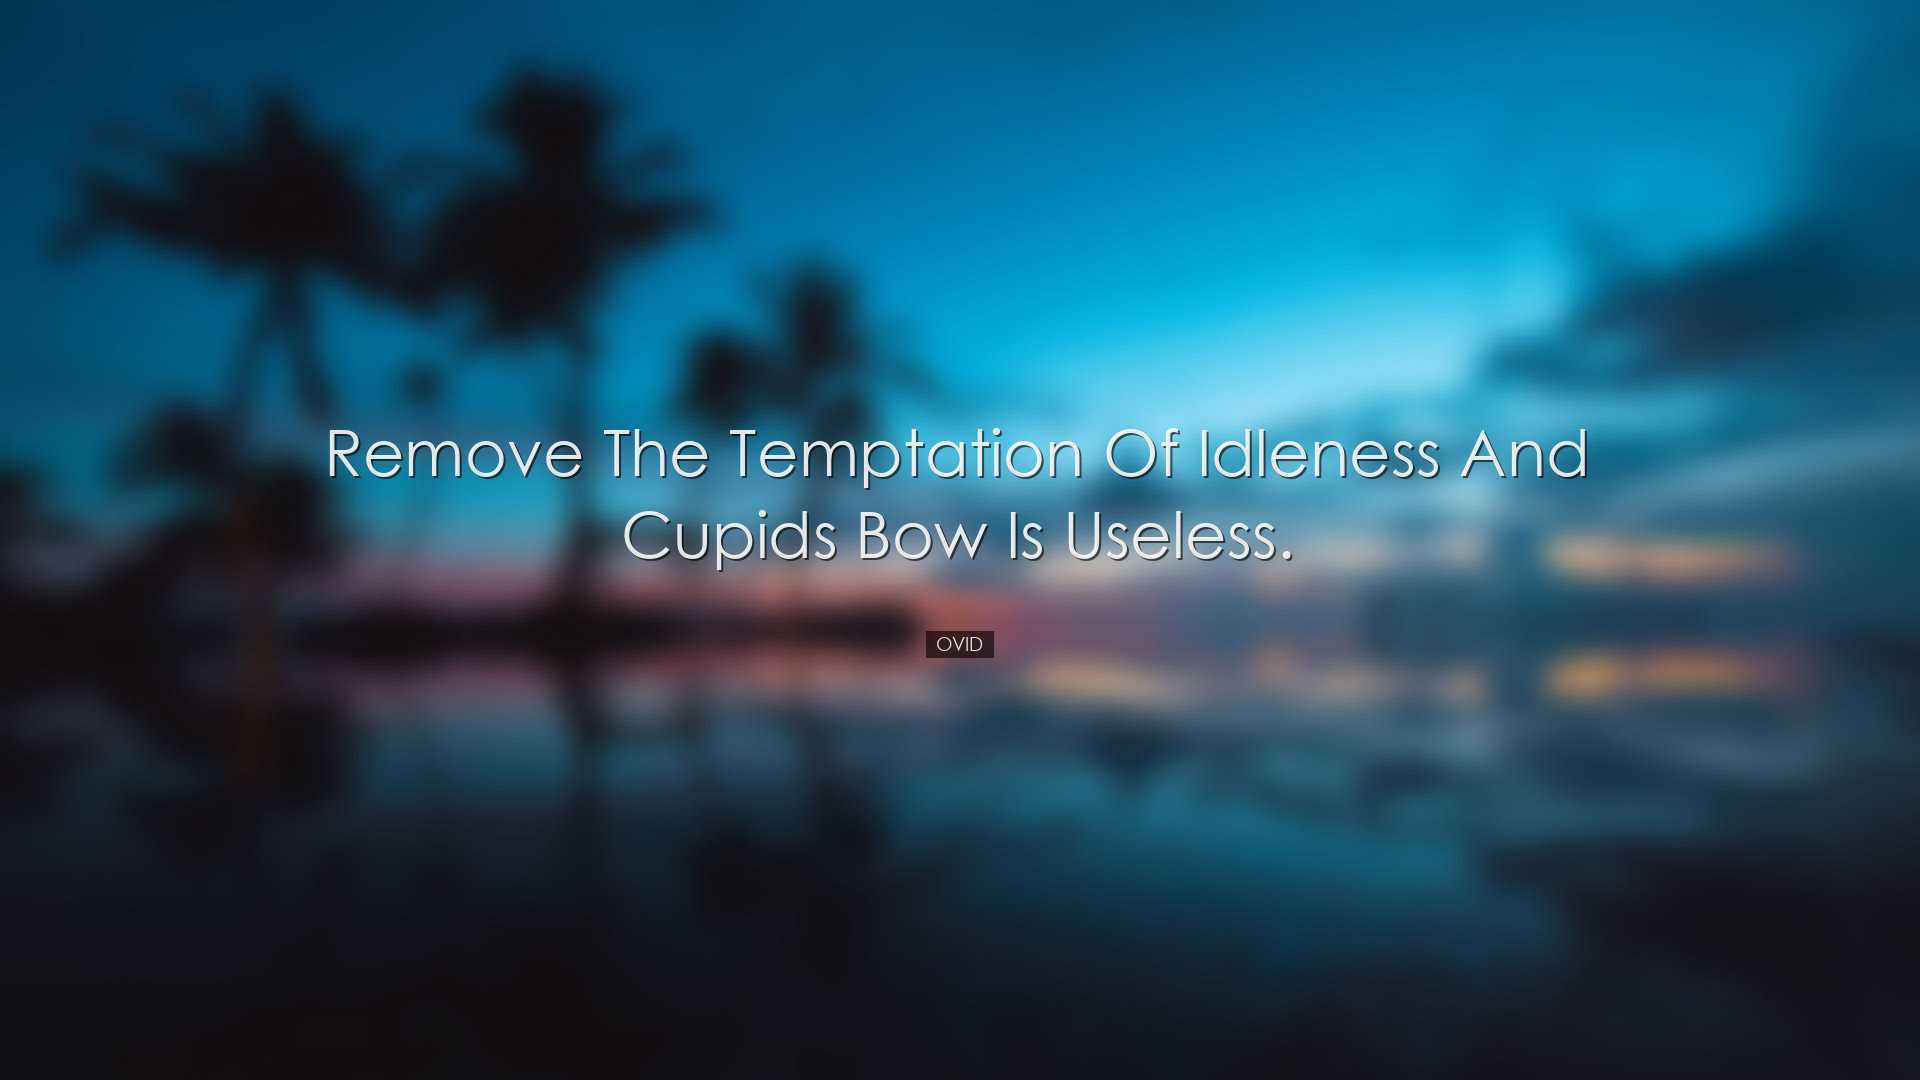 Remove the temptation of idleness and cupids bow is useless. - Ovi